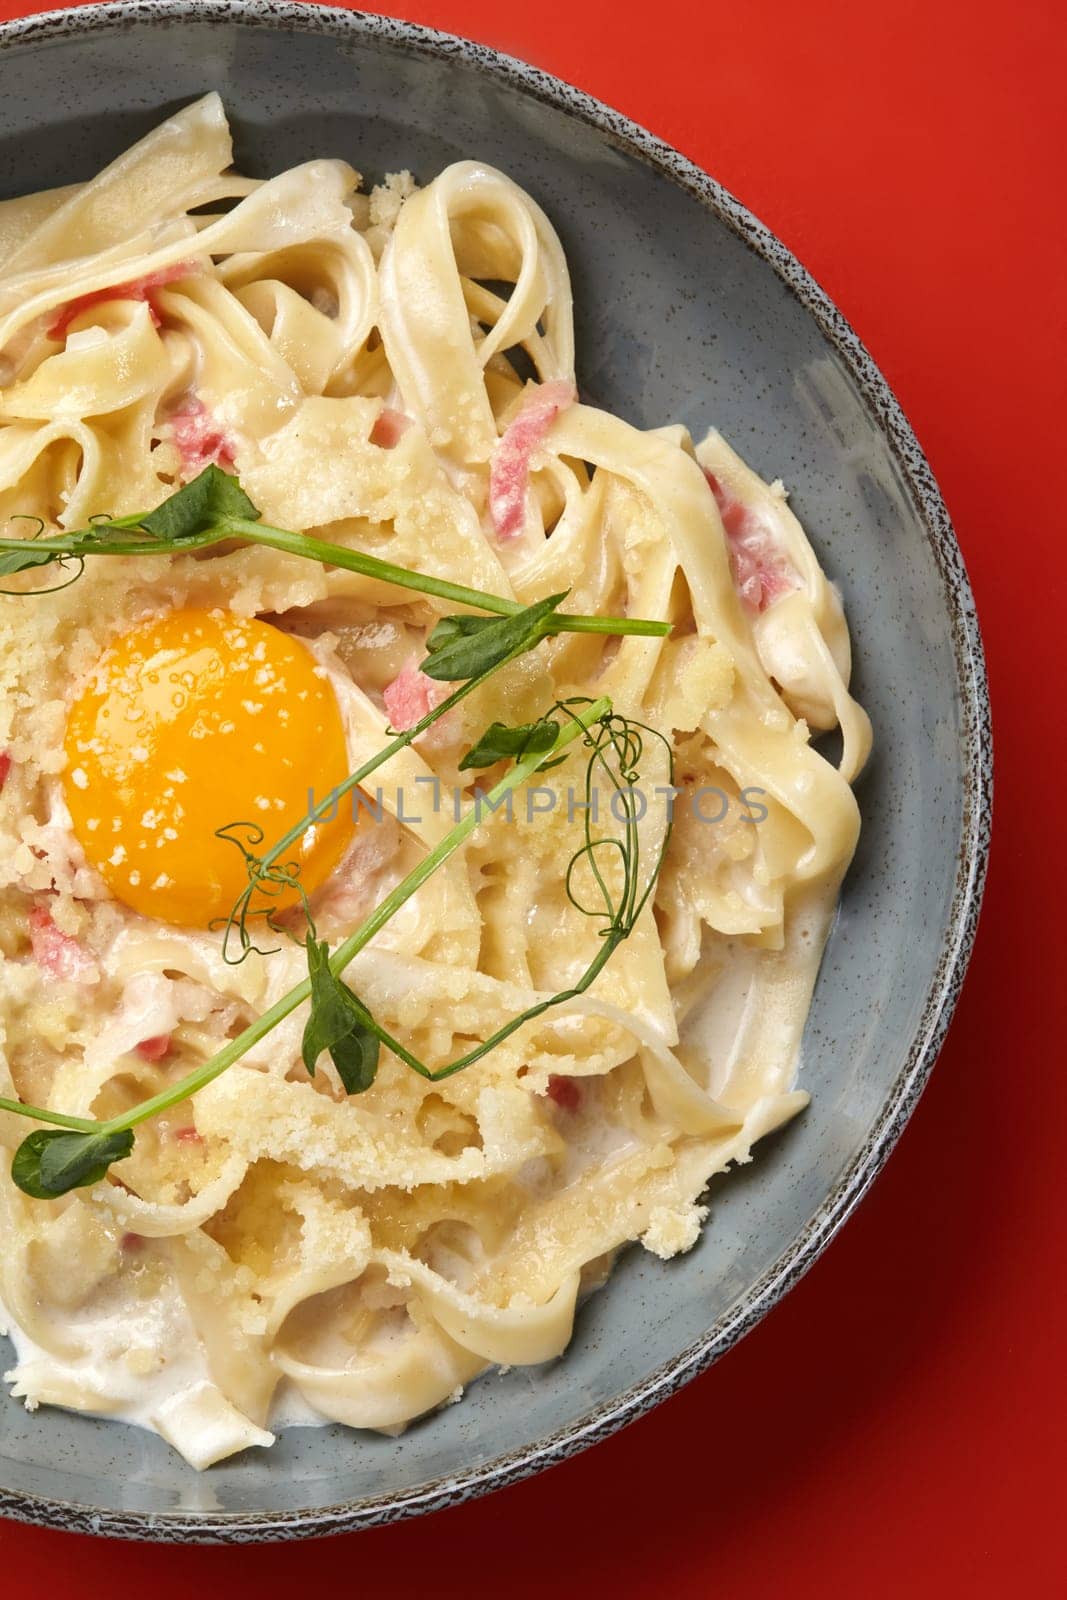 Detailed view of classic fettuccine carbonara with chunks of pancetta and vibrant egg yolk sprinkled with grated parmesan and garnished with pea shoots, served in gray ceramic plate on red backdrop